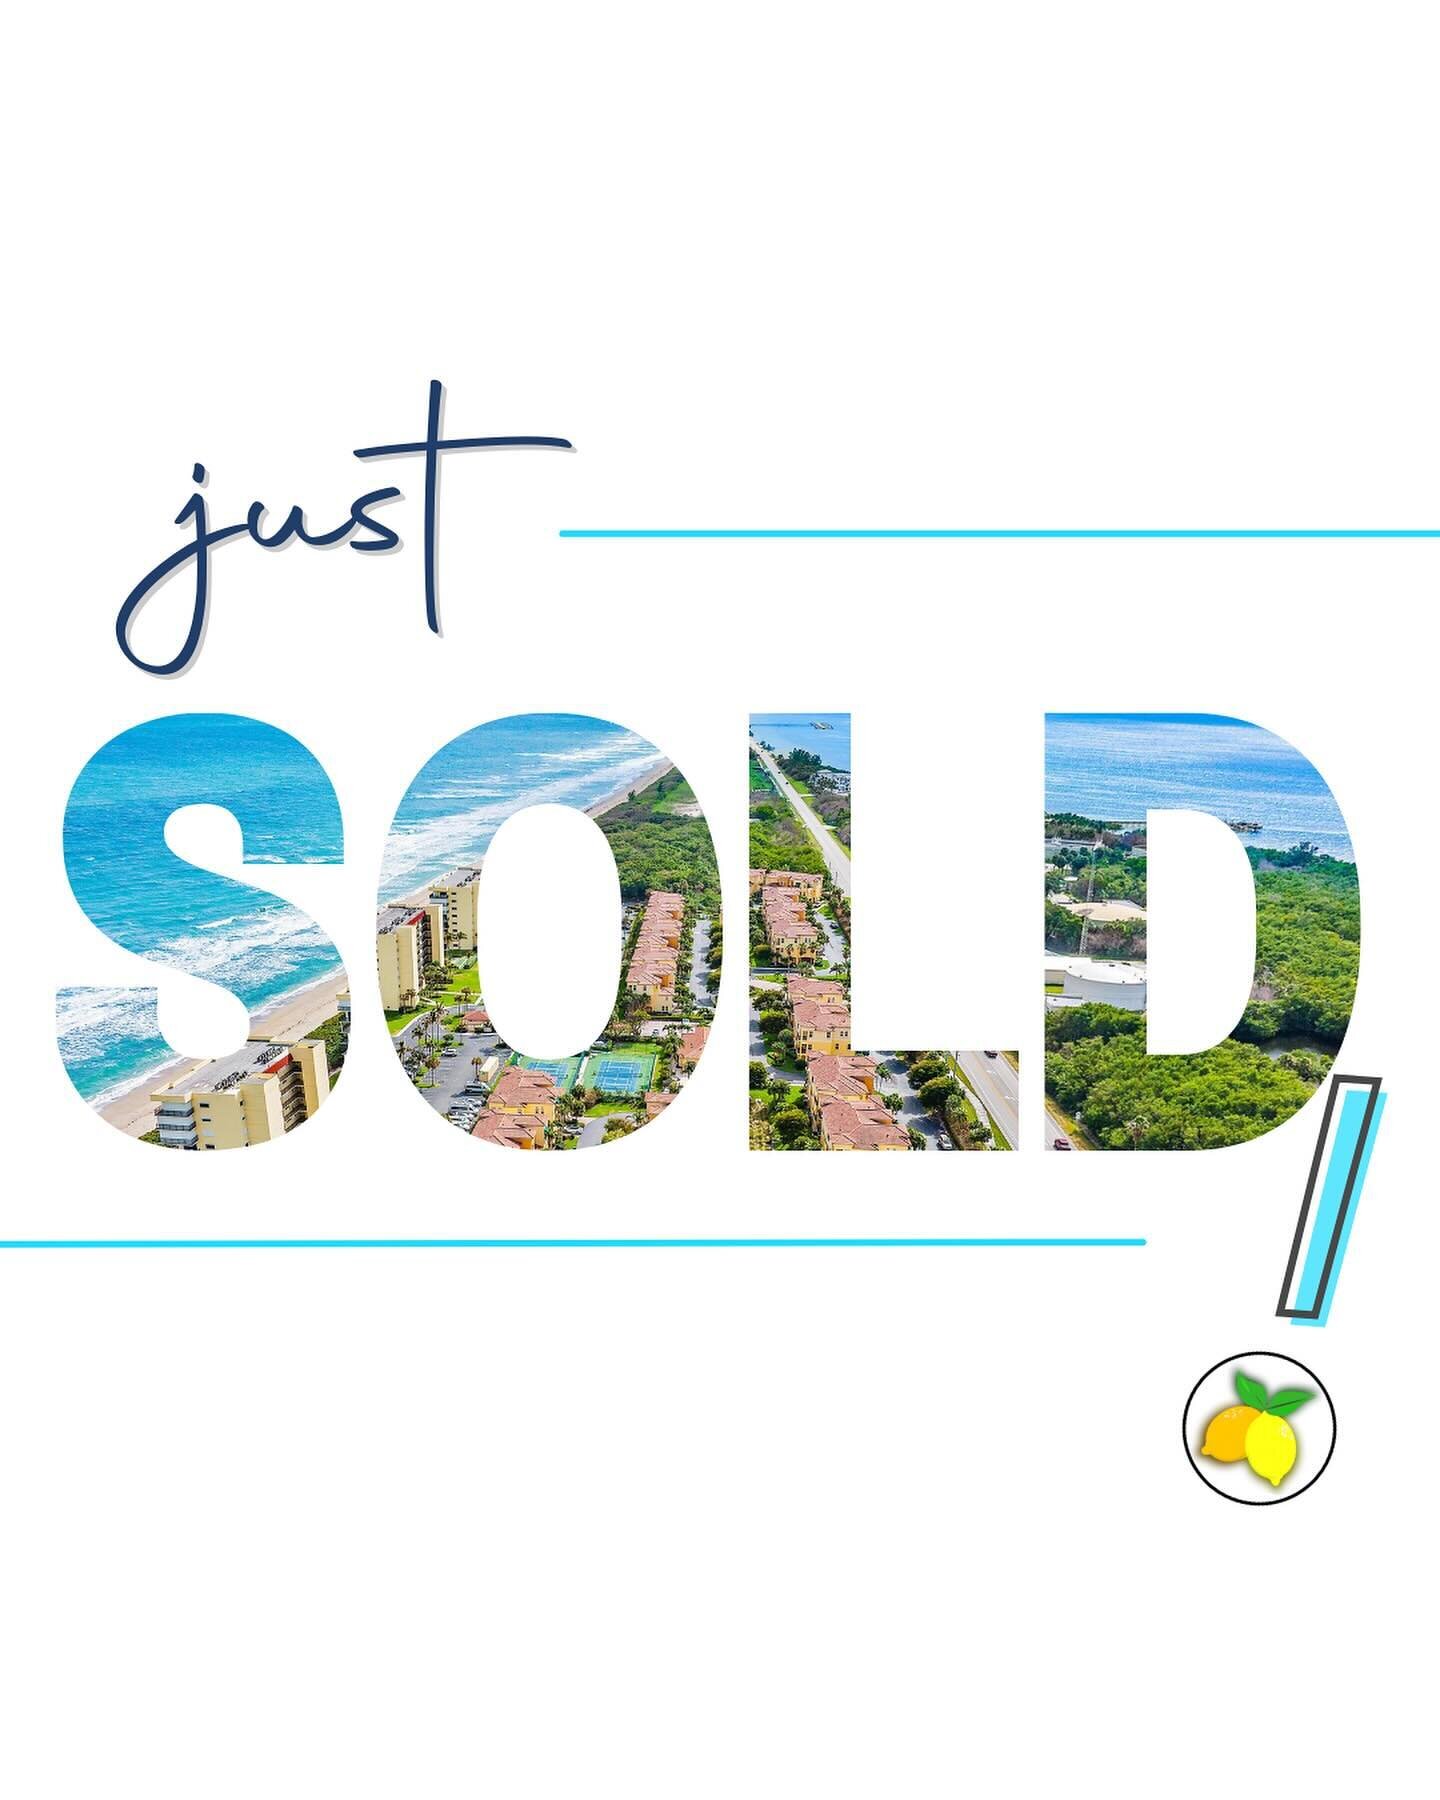 SOLD! 🔥

This perfect 3-story townhome is officially OFF THE MARKET!

📍124 Ocean Bay Drive &bull; Jensen Beach
3 bedrooms &bull; 3.5 bathrooms &bull; 2,682 square feet

Congratulations to our amazing sellers, we are wishing you so much love on this